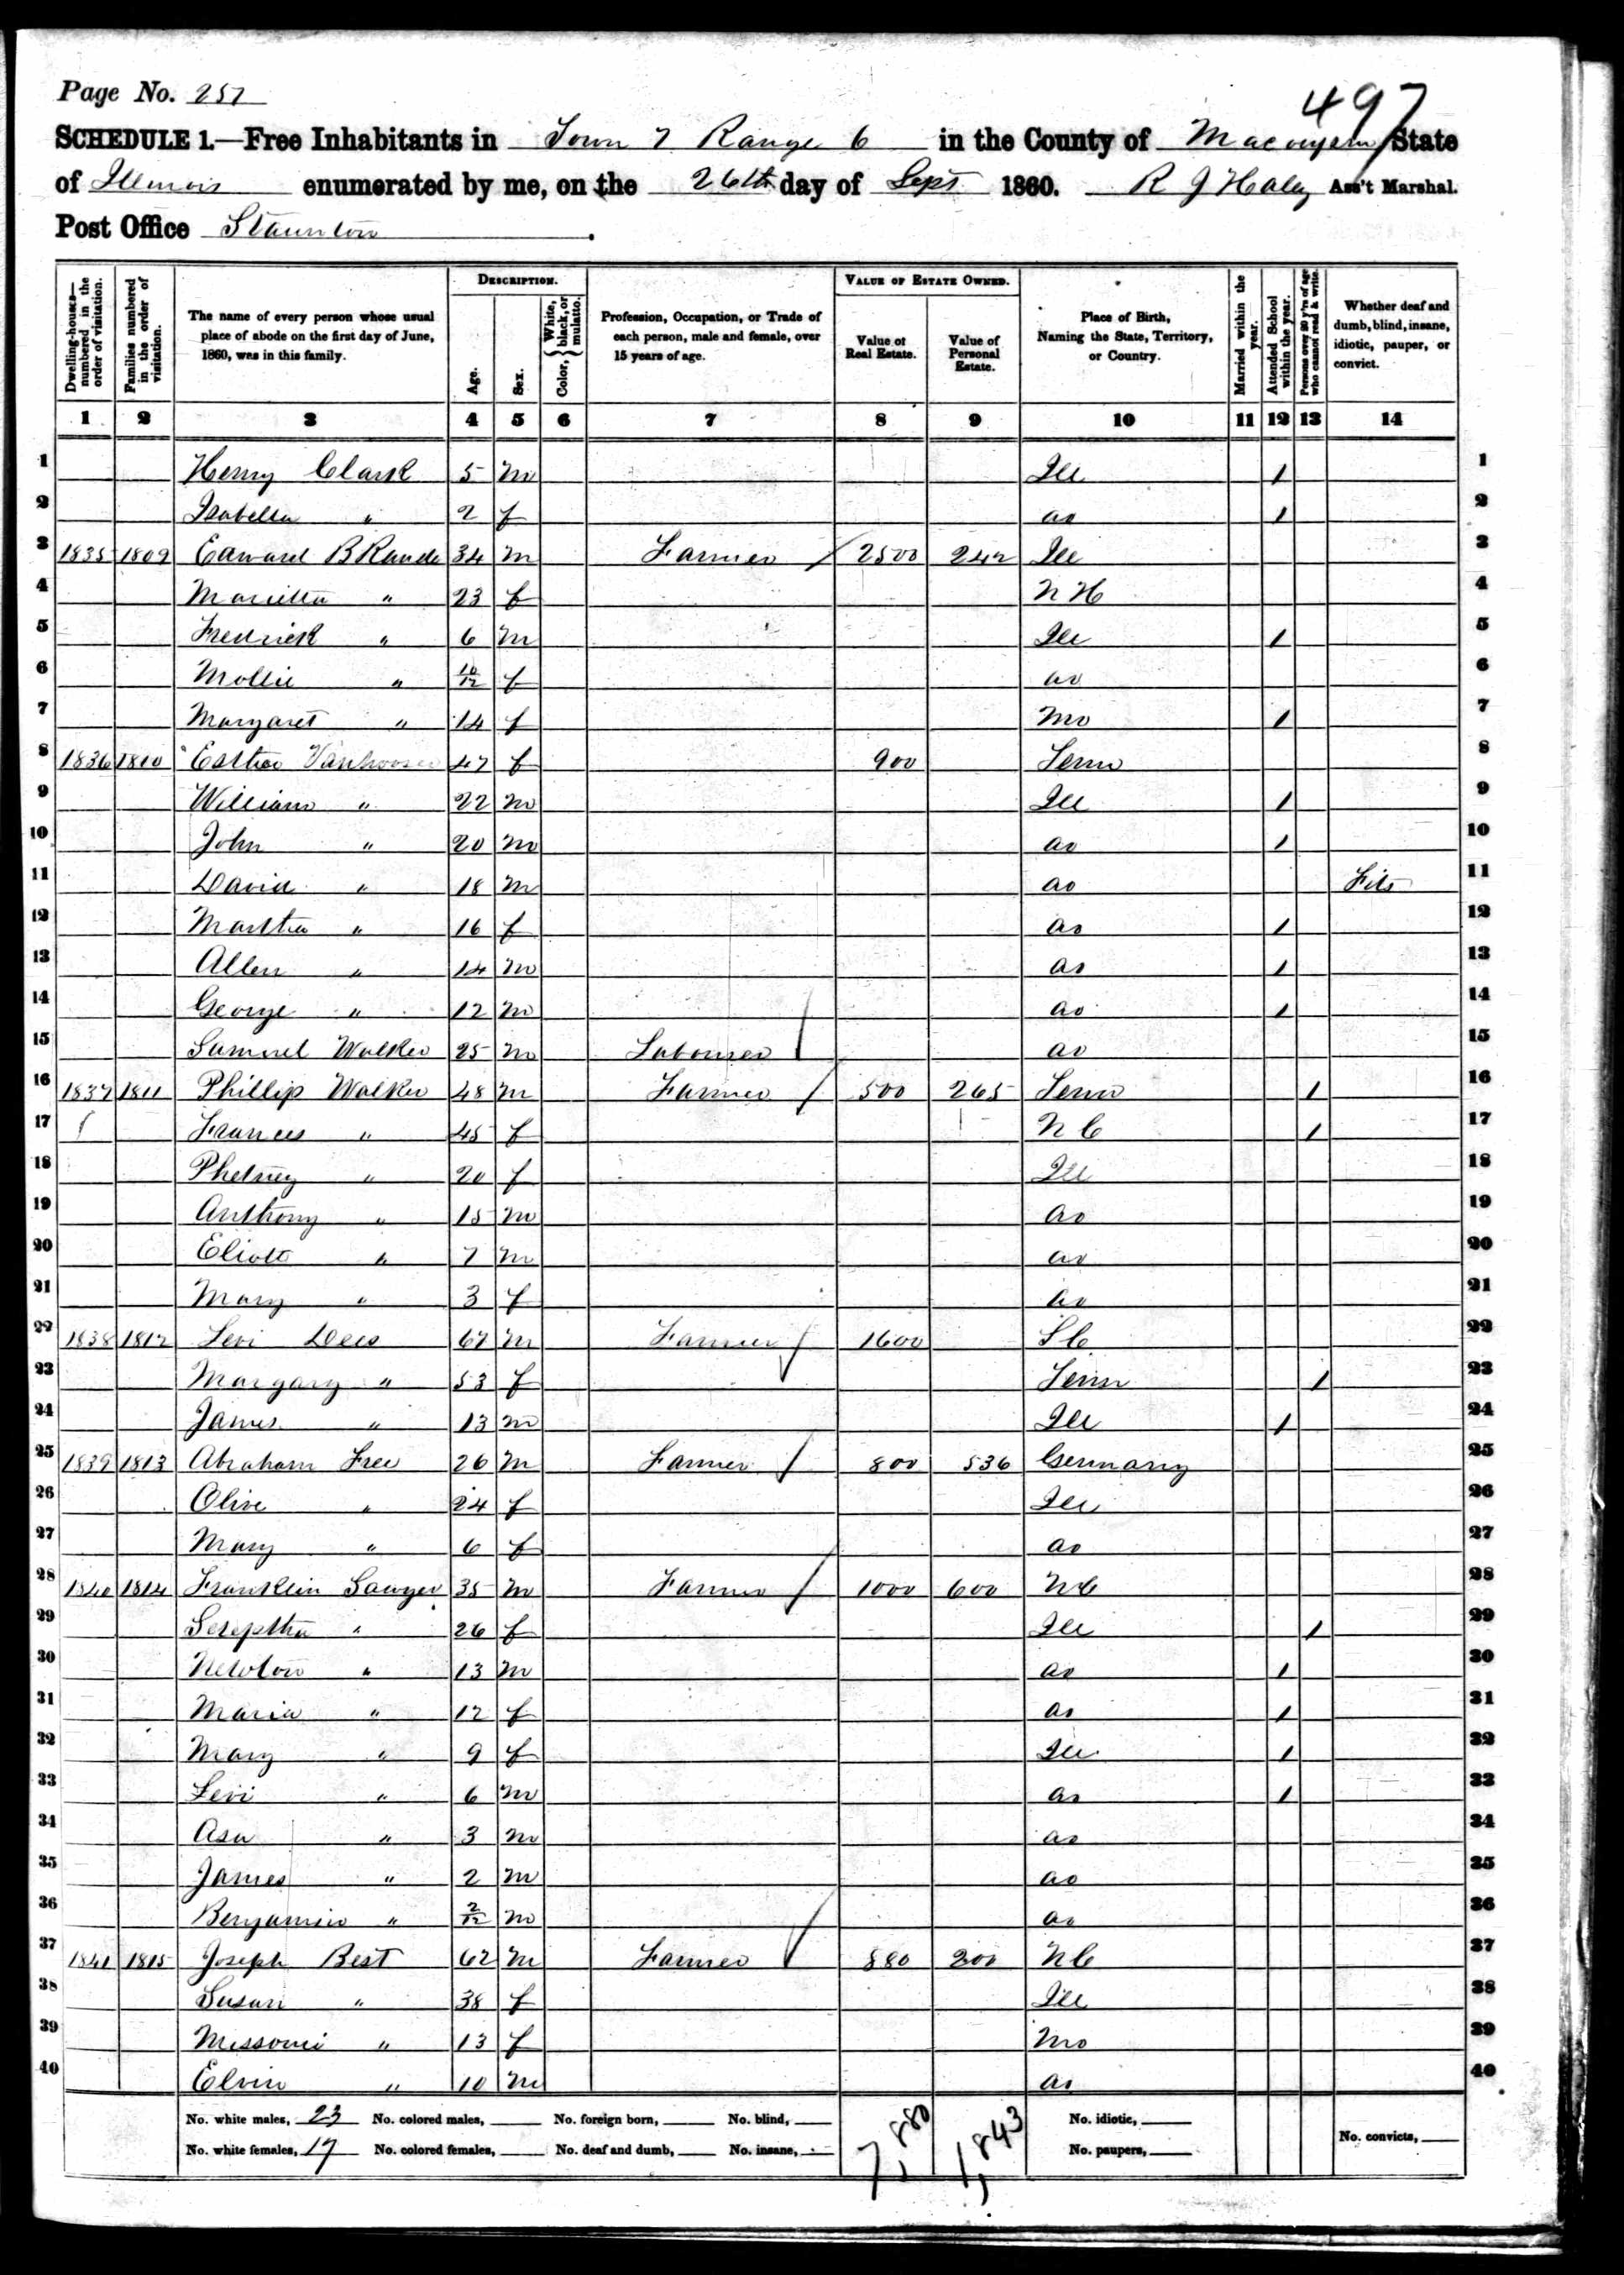 Philip V. Walker (possible son of Jacob and Agnes), 1860 Macoupin County, Illinois, census